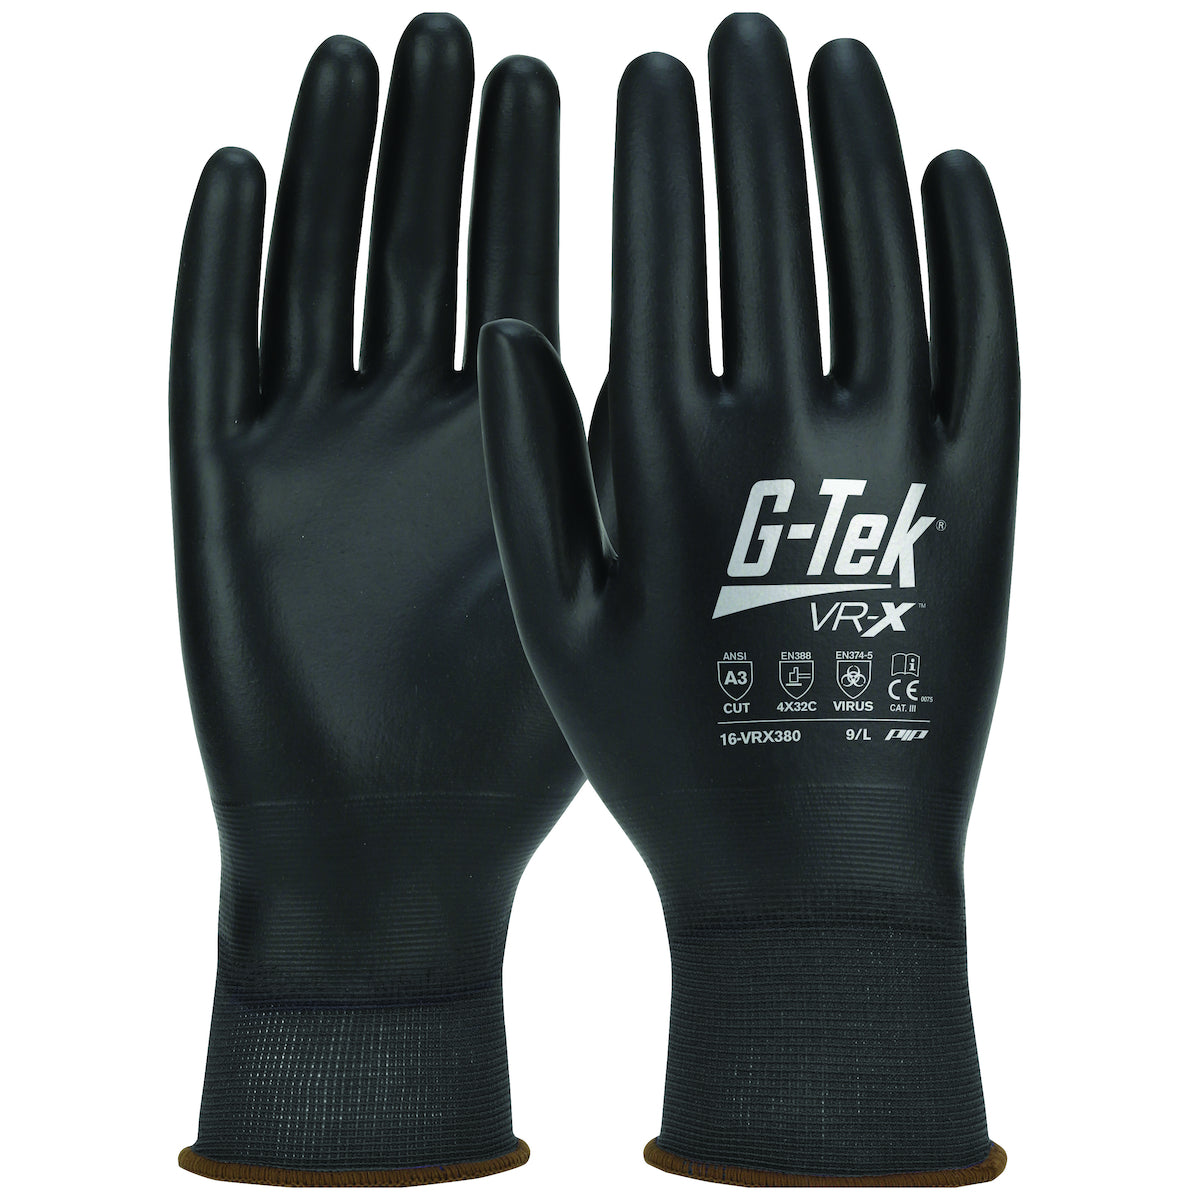 G-TEK VR-X, Gloves with Advanced Barrier Protection Cut Level A3, TouchScreen Compatible